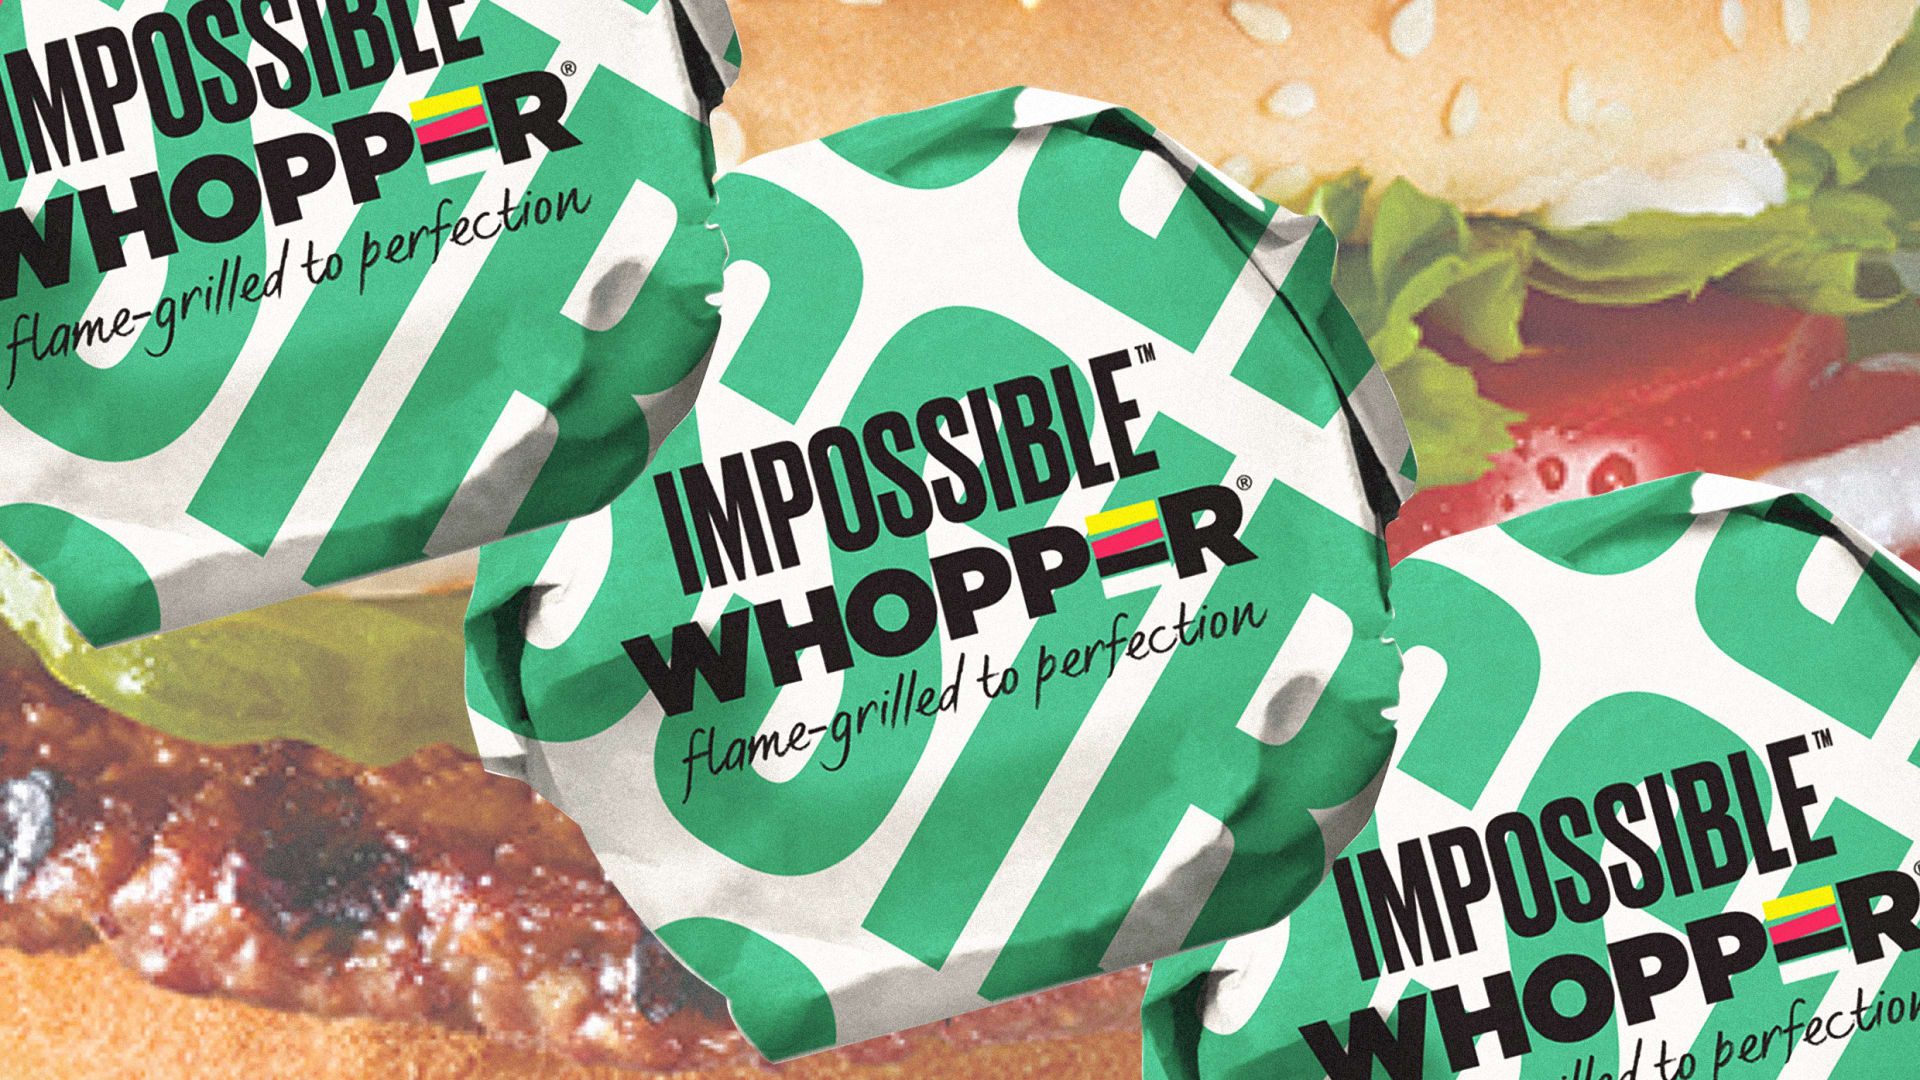 Burger King is rolling out the Impossible Whopper nationwide